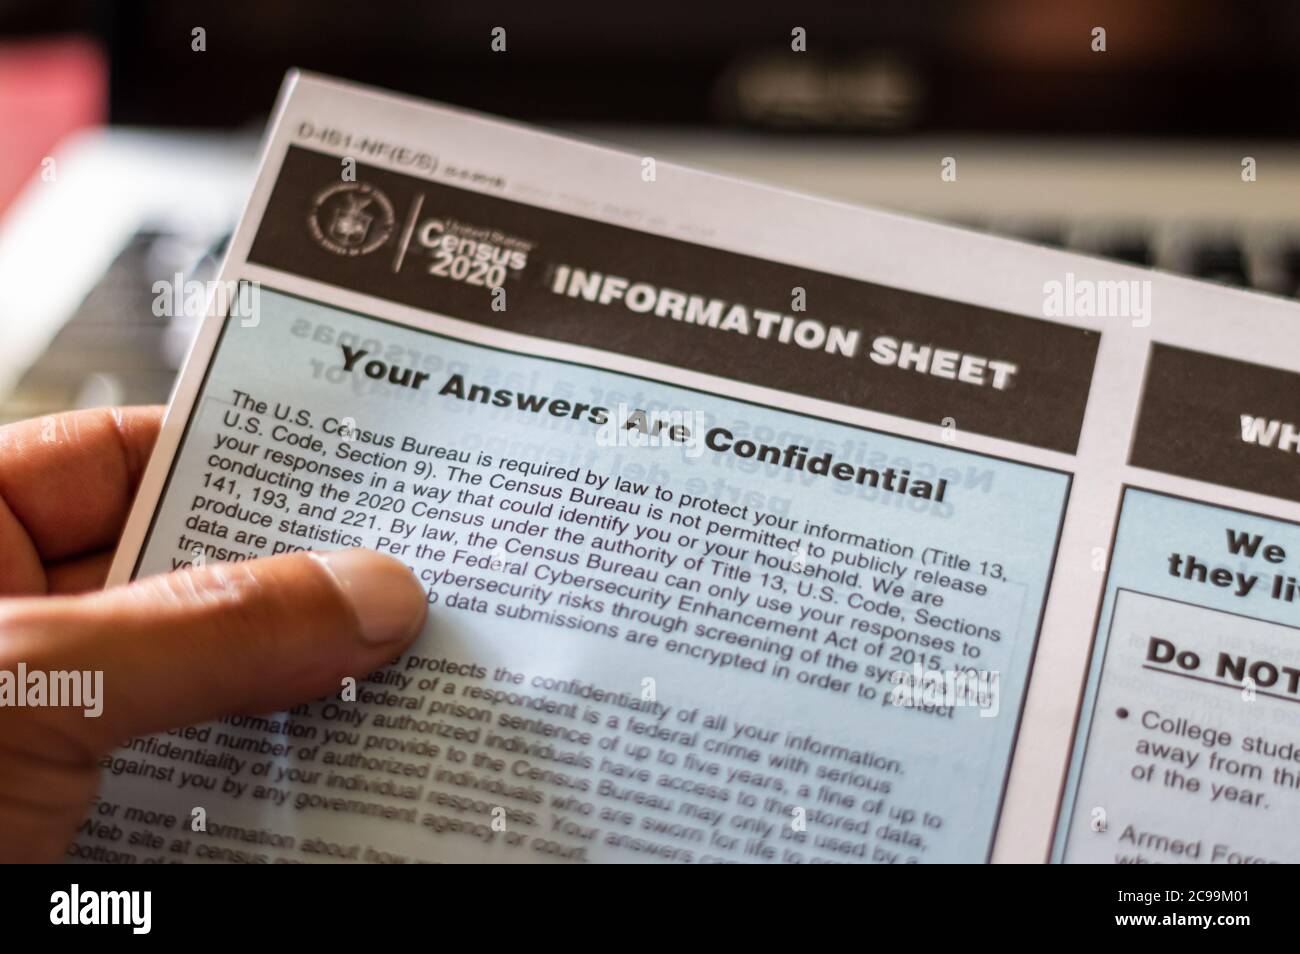 A hand holding an Information Sheet about Confidentiality from the US Census Bureau. Chicago, Illinois-July 29, 2020 Stock Photo